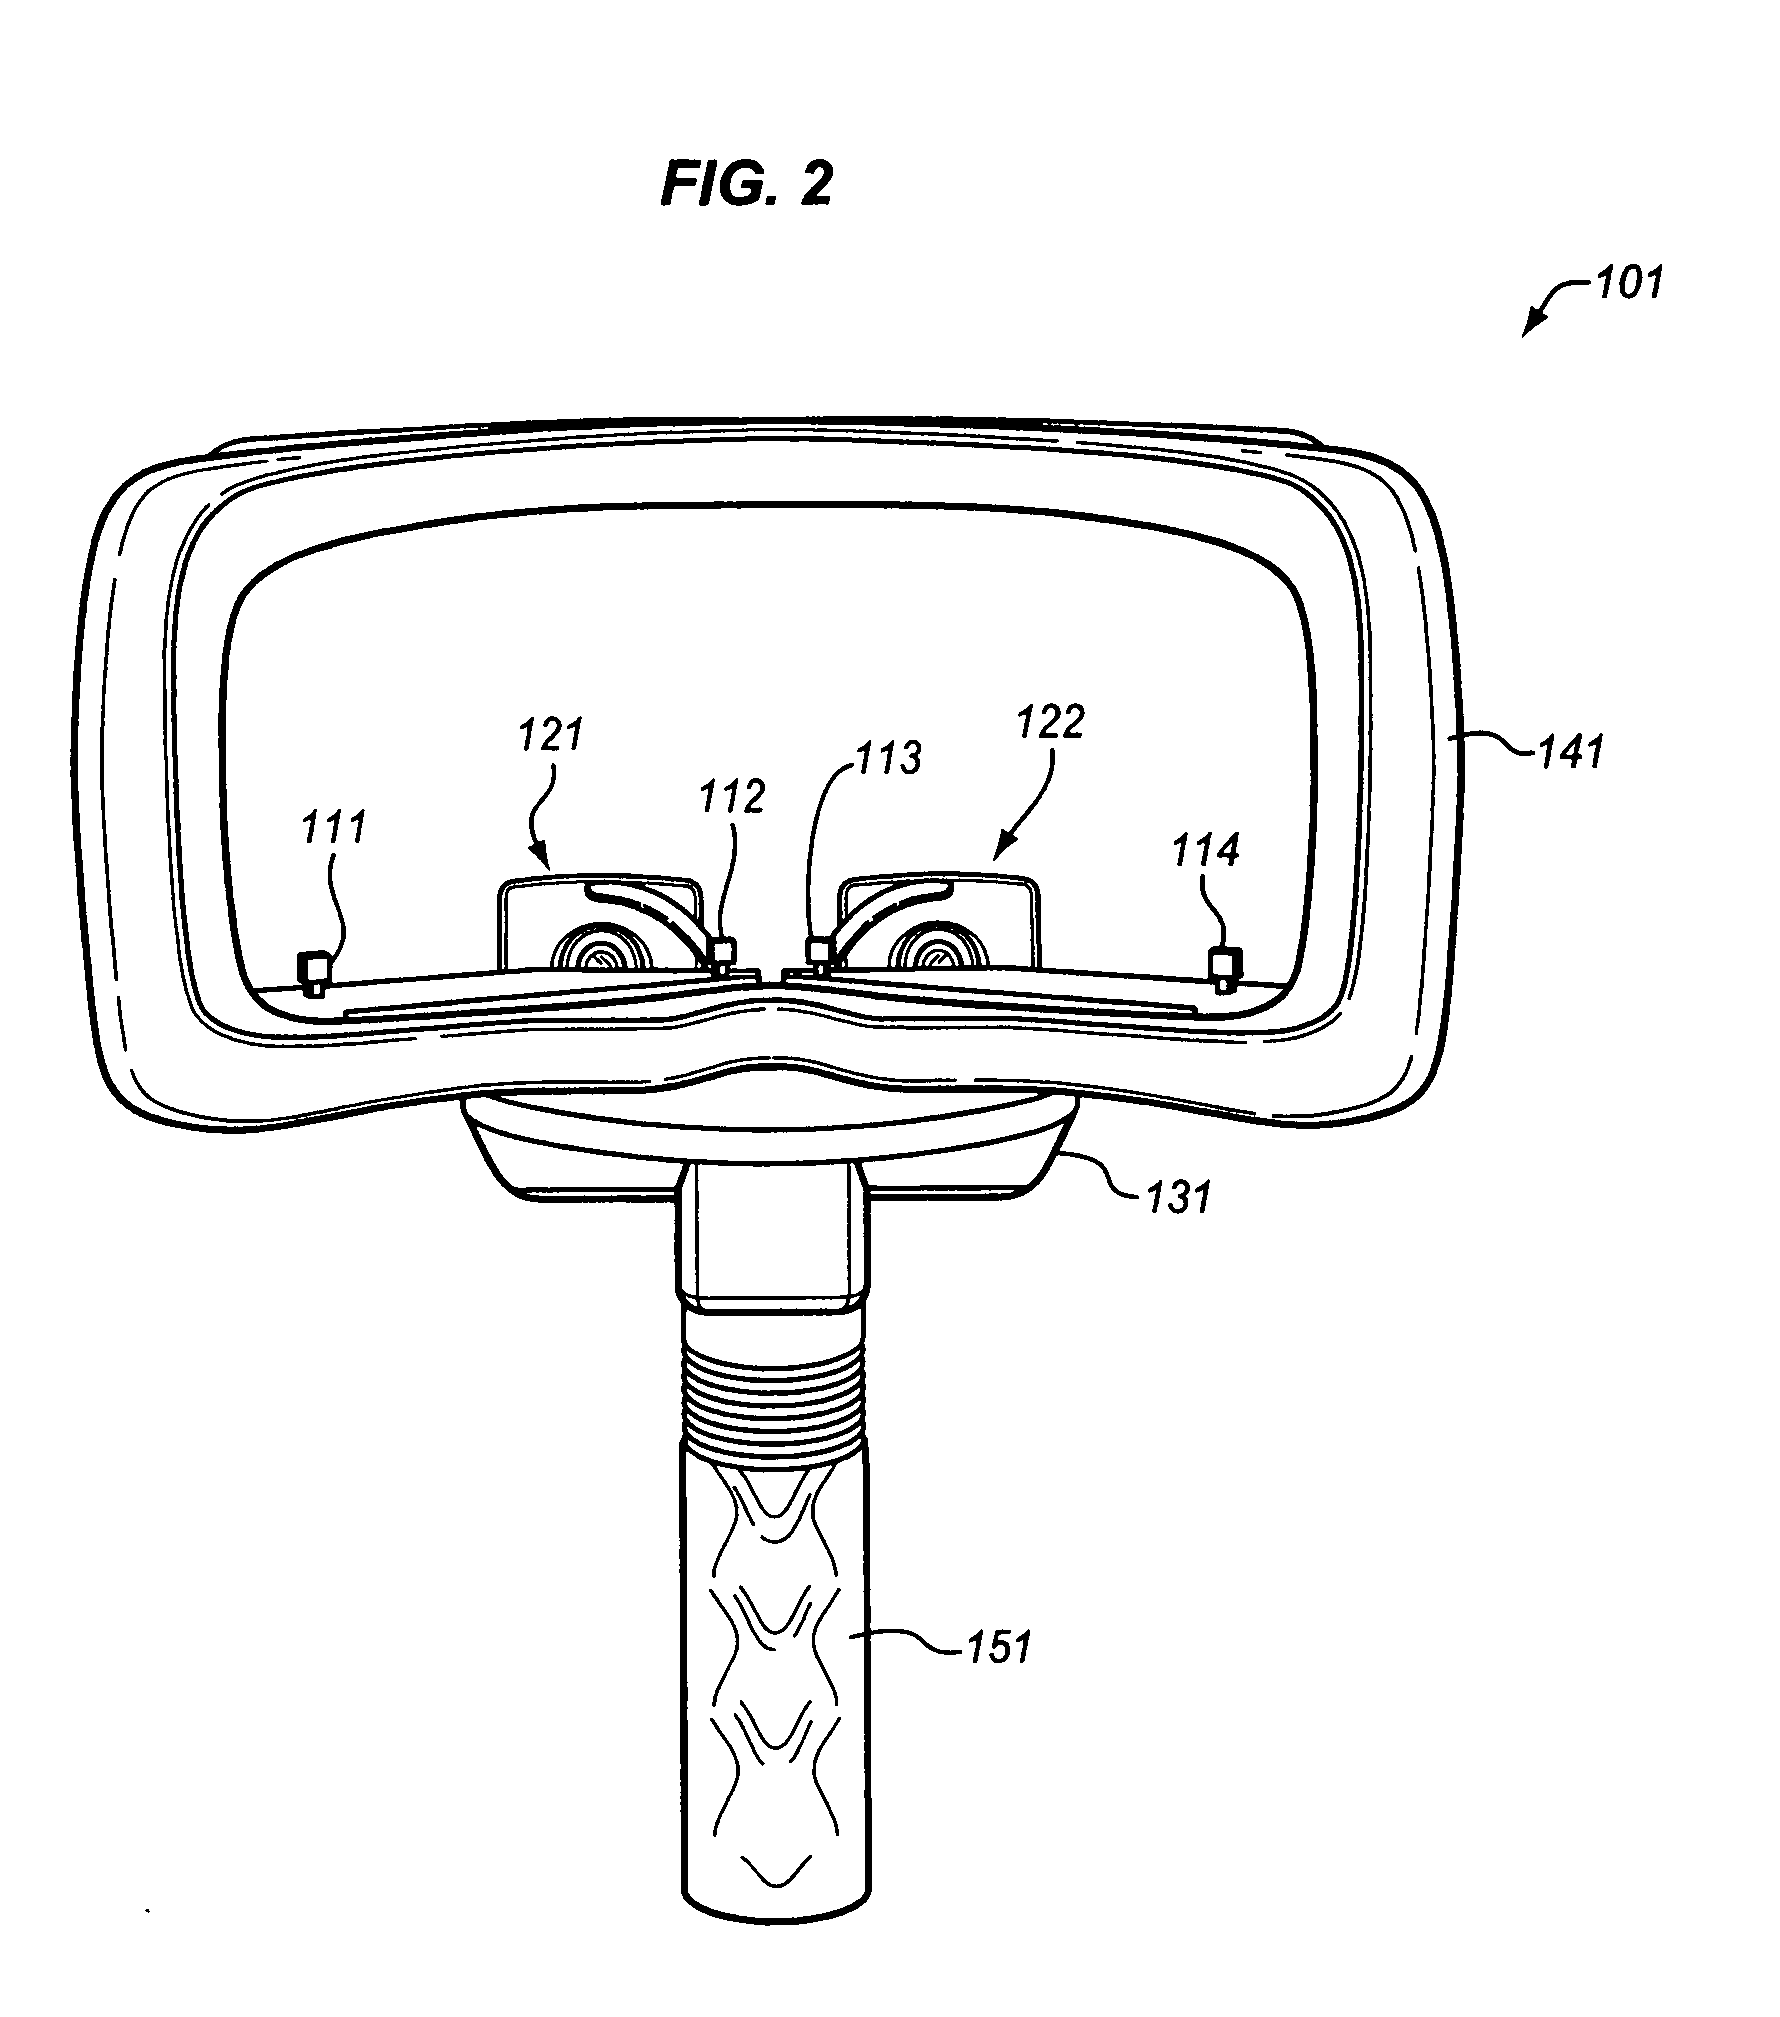 Image-based system to observe and document eye responses having a reflective protractor for measurement of stimulus position